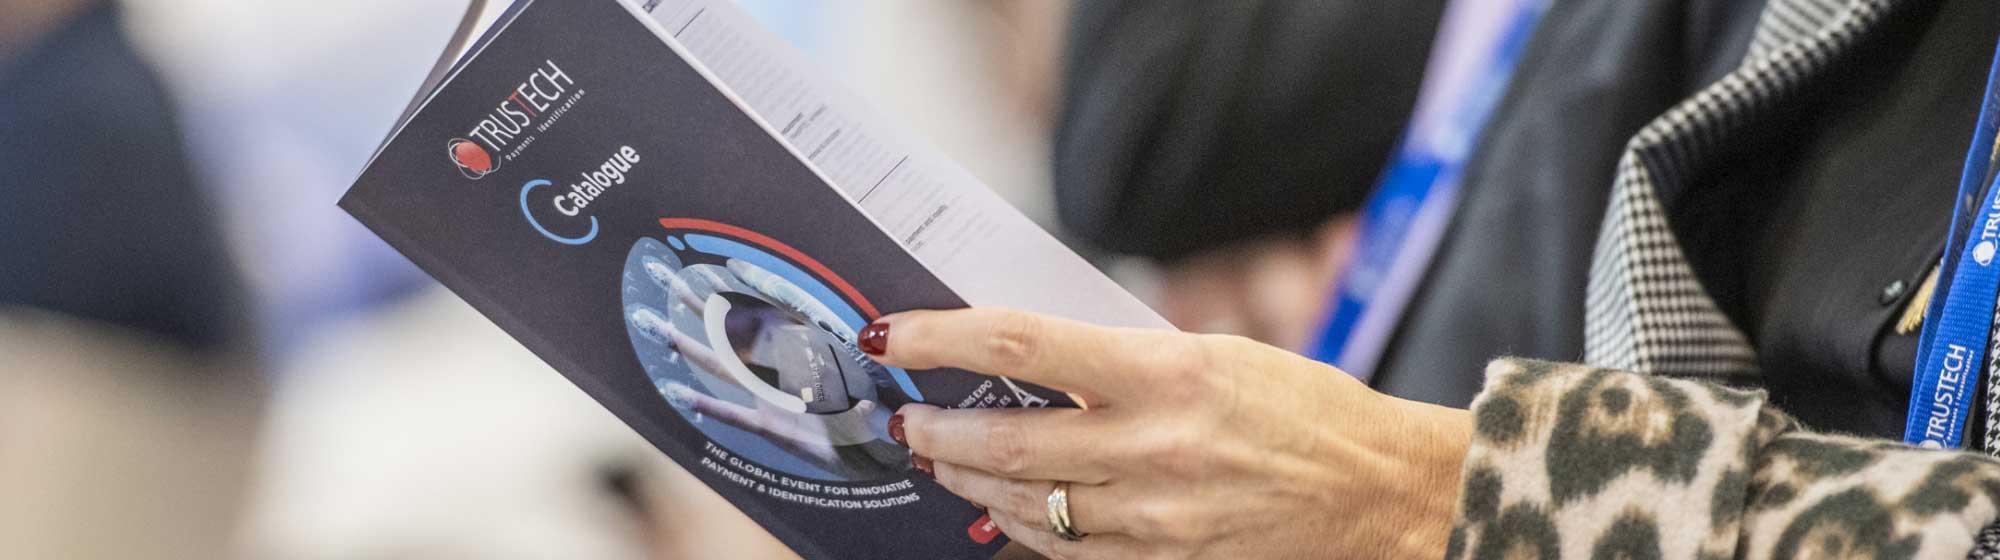 a seated woman flips through the Trustech event catalog